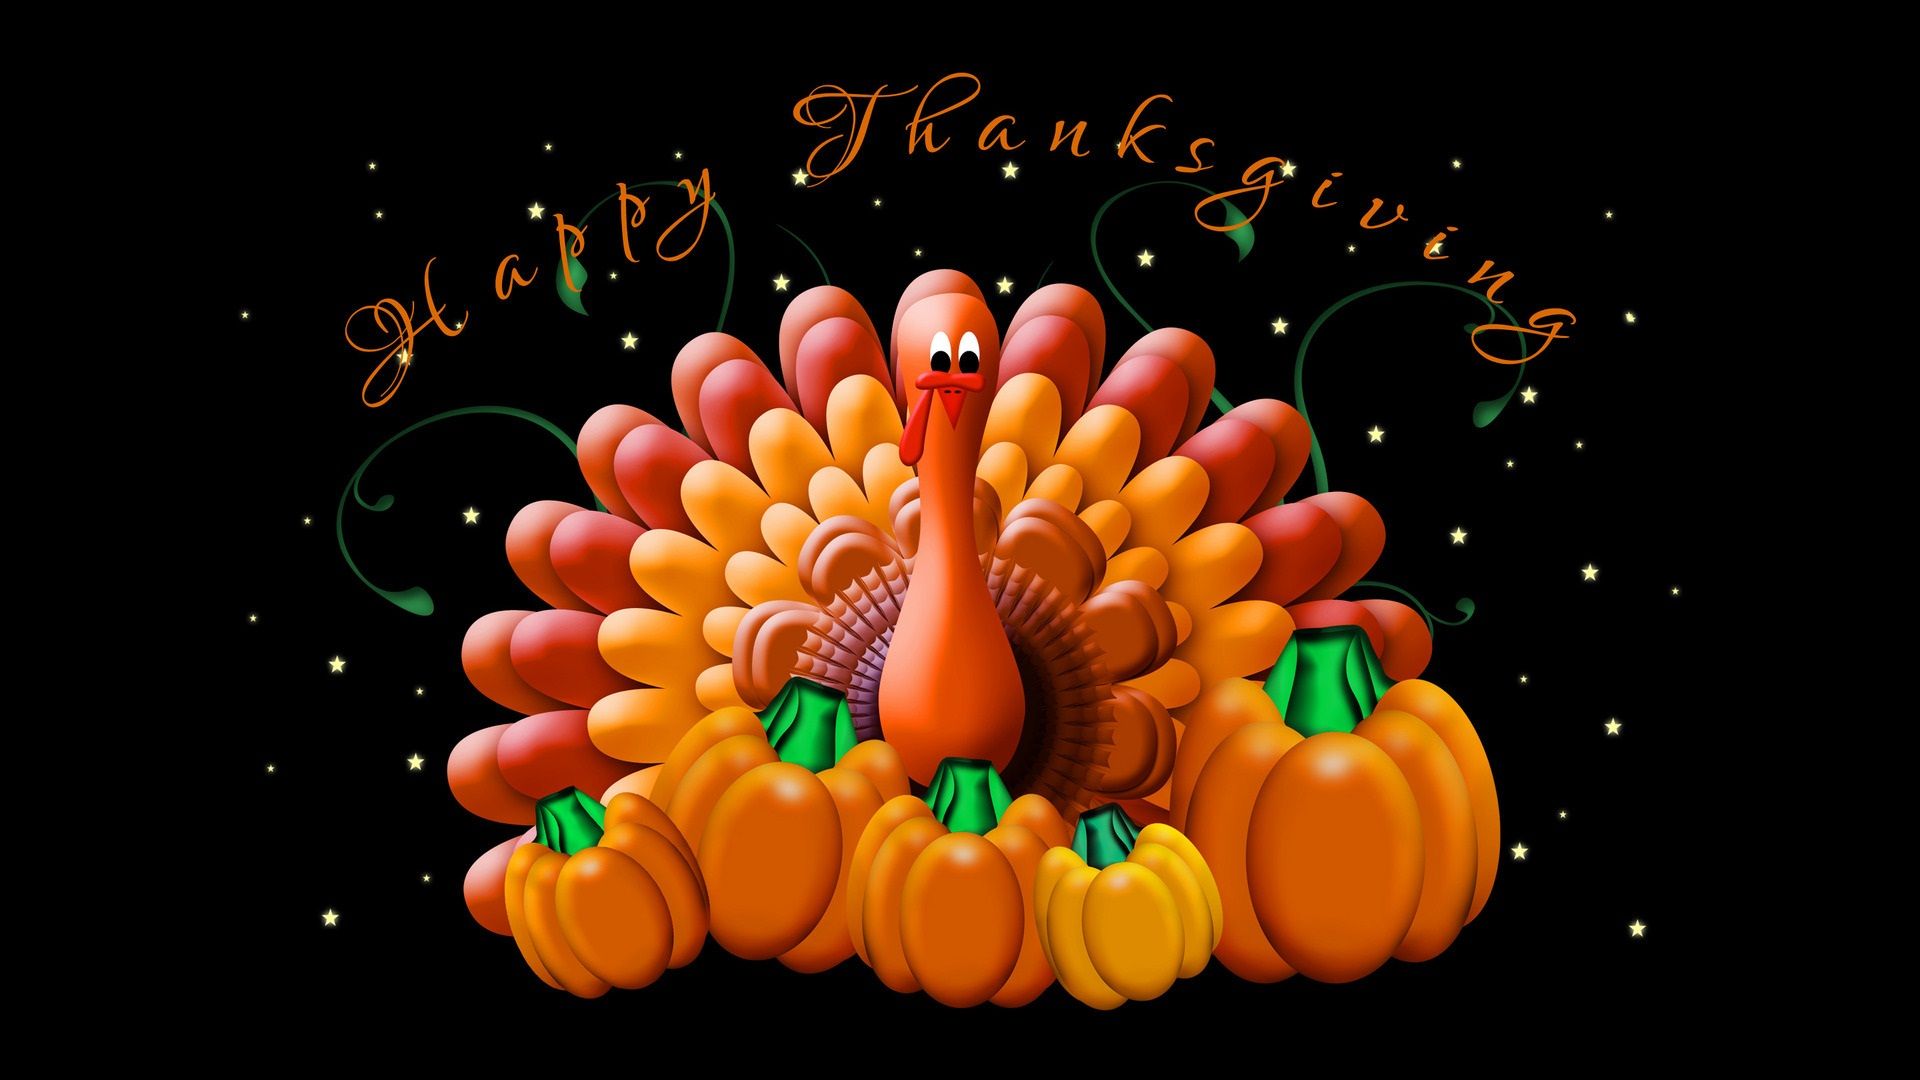 Download the Best Thanksgiving Wallpaper 2015 for Mobile, Mac and PC